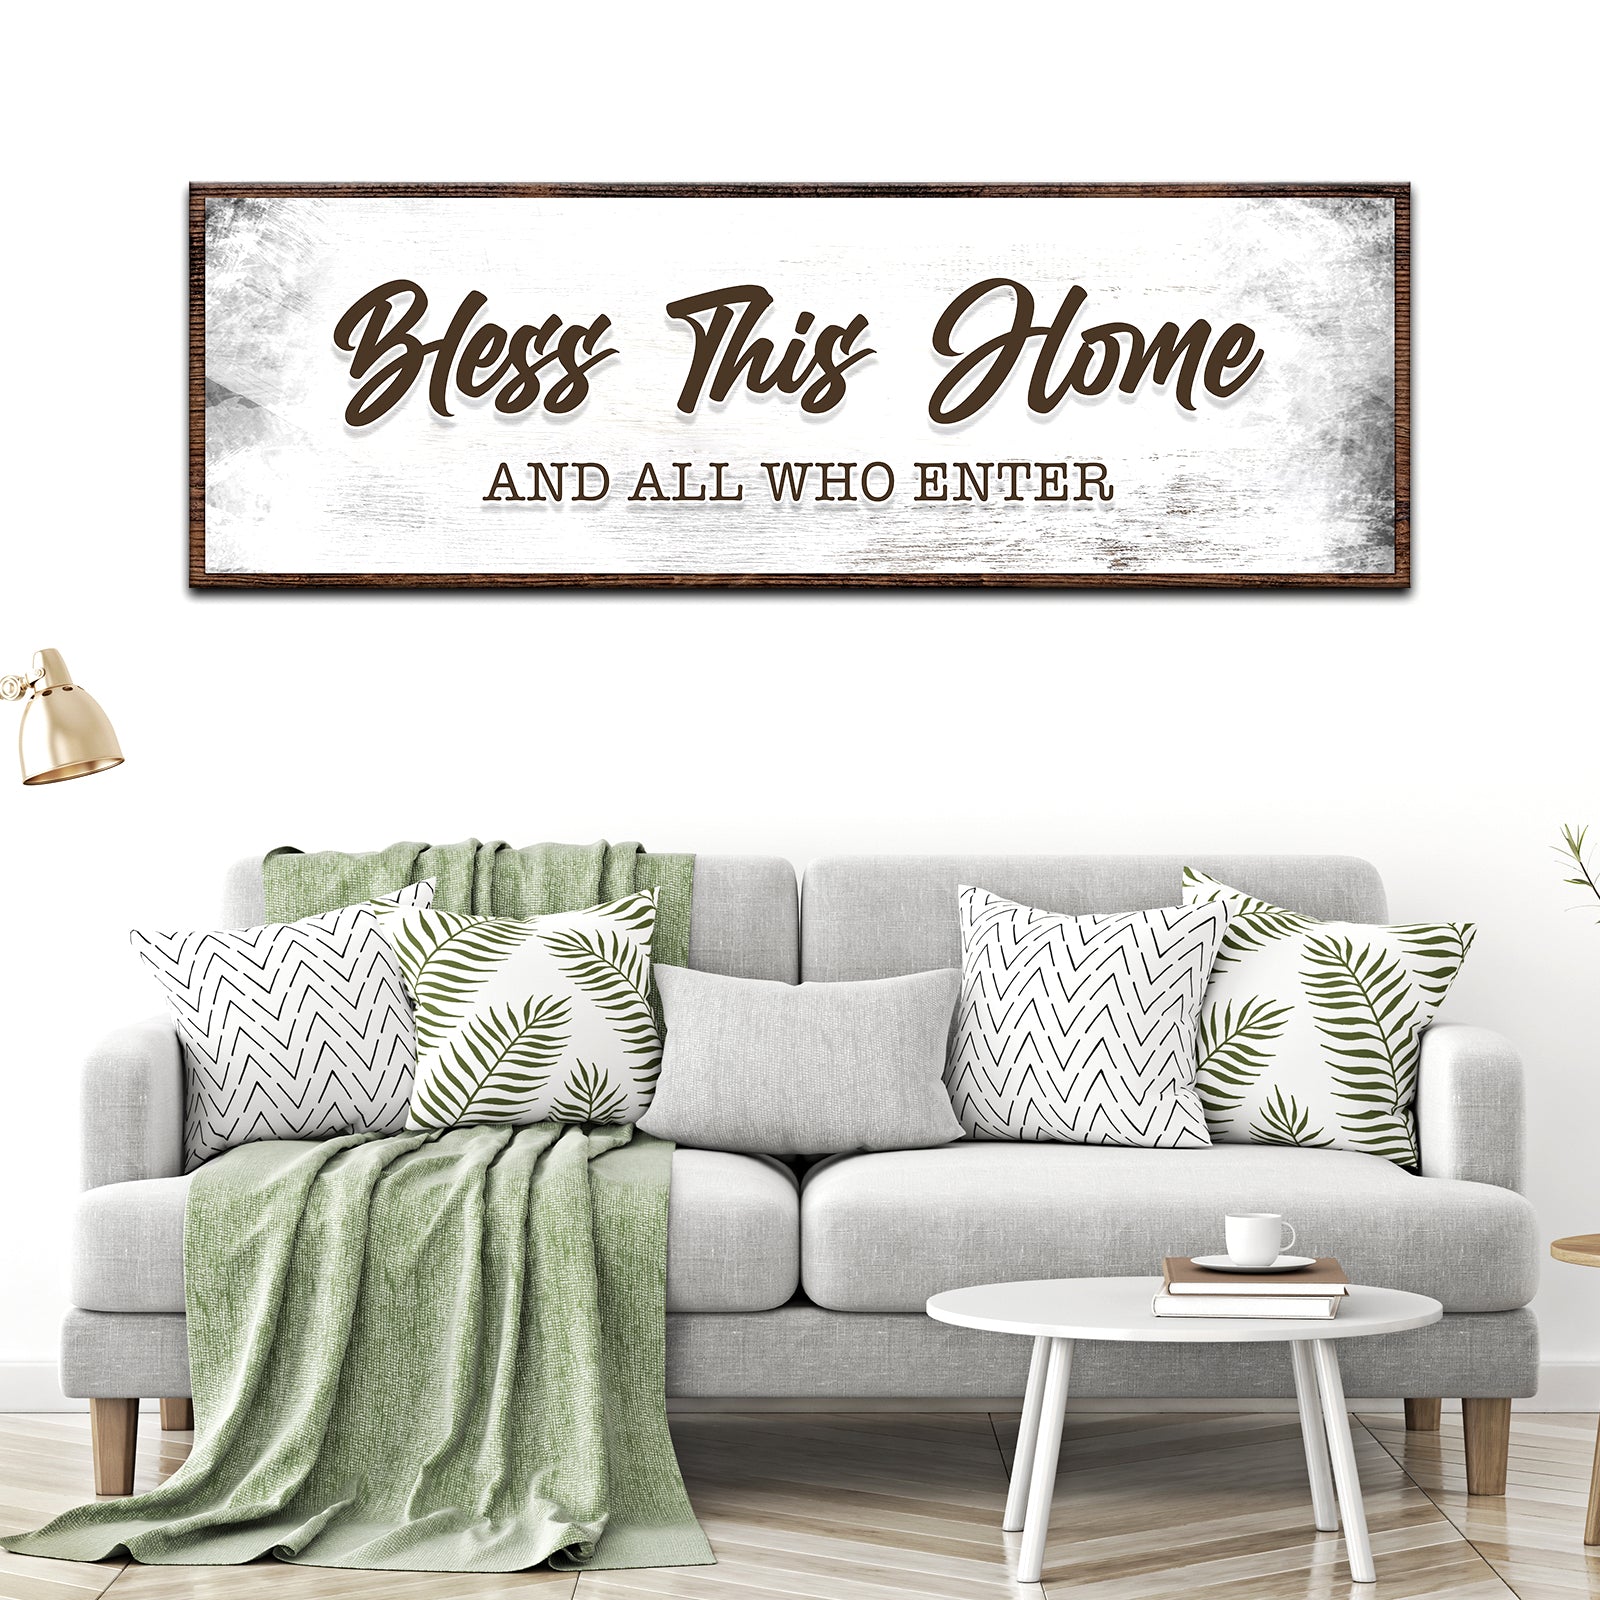 Bless This Home and All Who Enter Sign - Image by Tailored Canvases